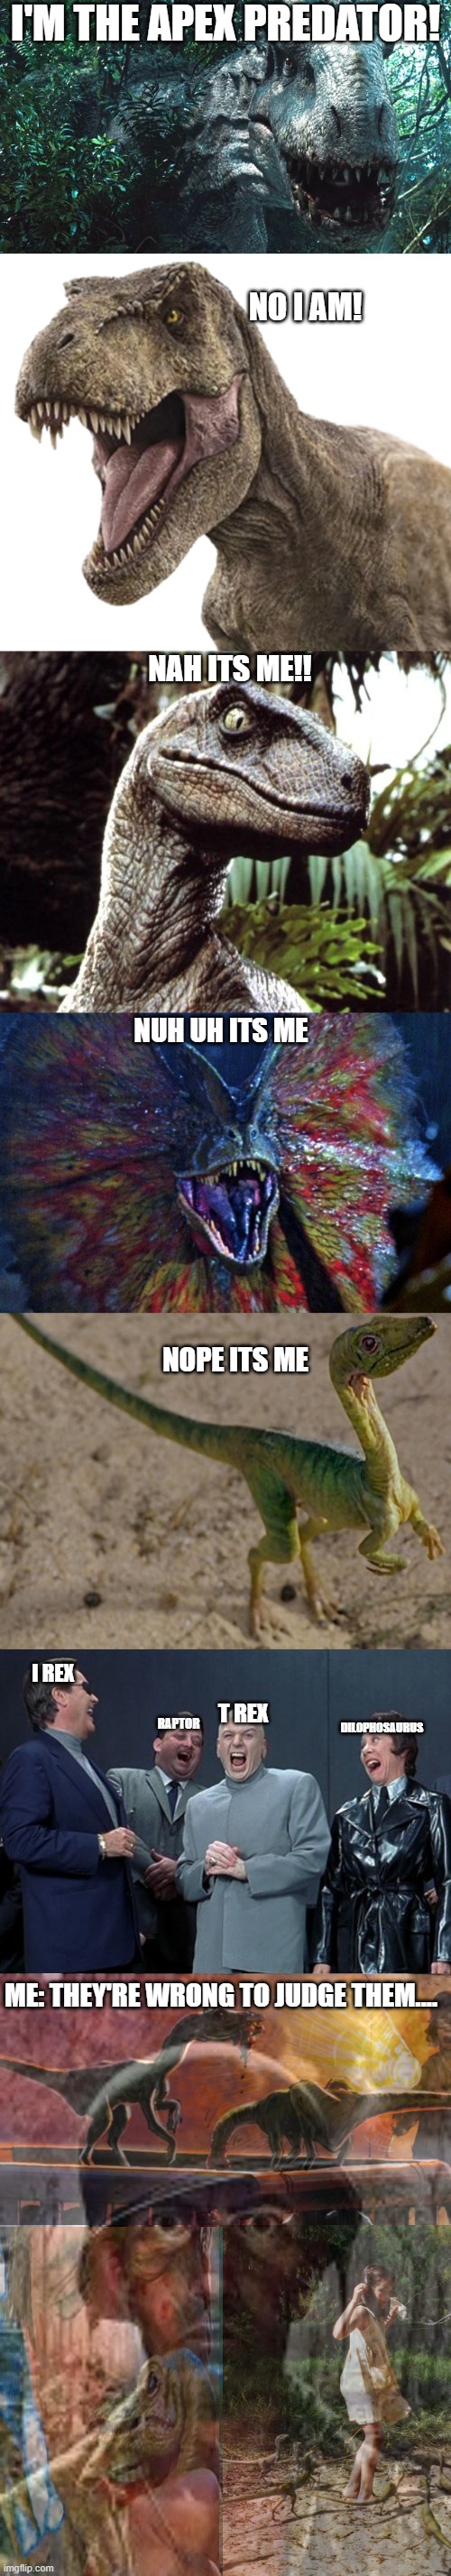 The Compy is the real predator | I'M THE APEX PREDATOR! NO I AM! NAH ITS ME!! NUH UH ITS ME; NOPE ITS ME; I REX; DILOPHOSAURUS; T REX; RAPTOR; ME: THEY'RE WRONG TO JUDGE THEM.... | image tagged in peekaboo,rexy 2,velociraptor,dilophosaurus,memes,laughing villains | made w/ Imgflip meme maker